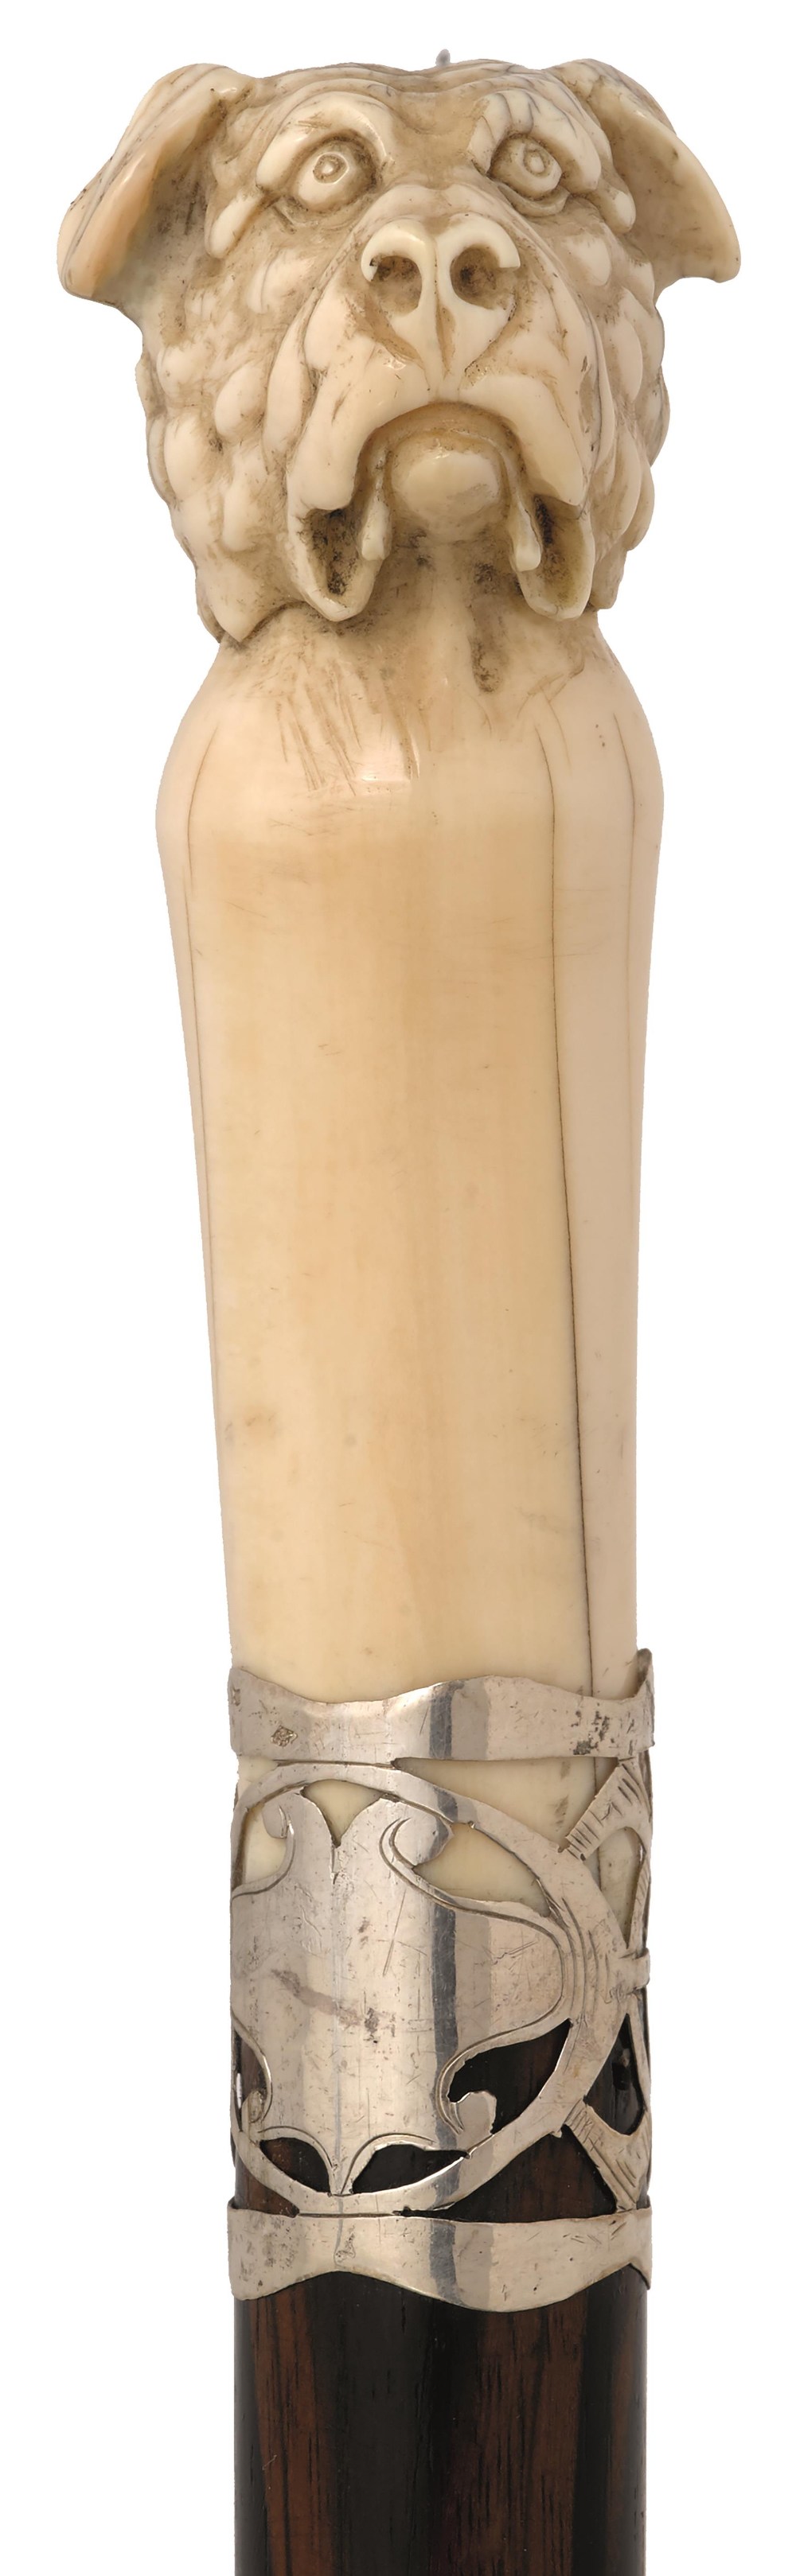 A LATE 19TH CENTURY WALKING CANE, the ivory pommel carved as a double headed dog, white metal - Image 2 of 3